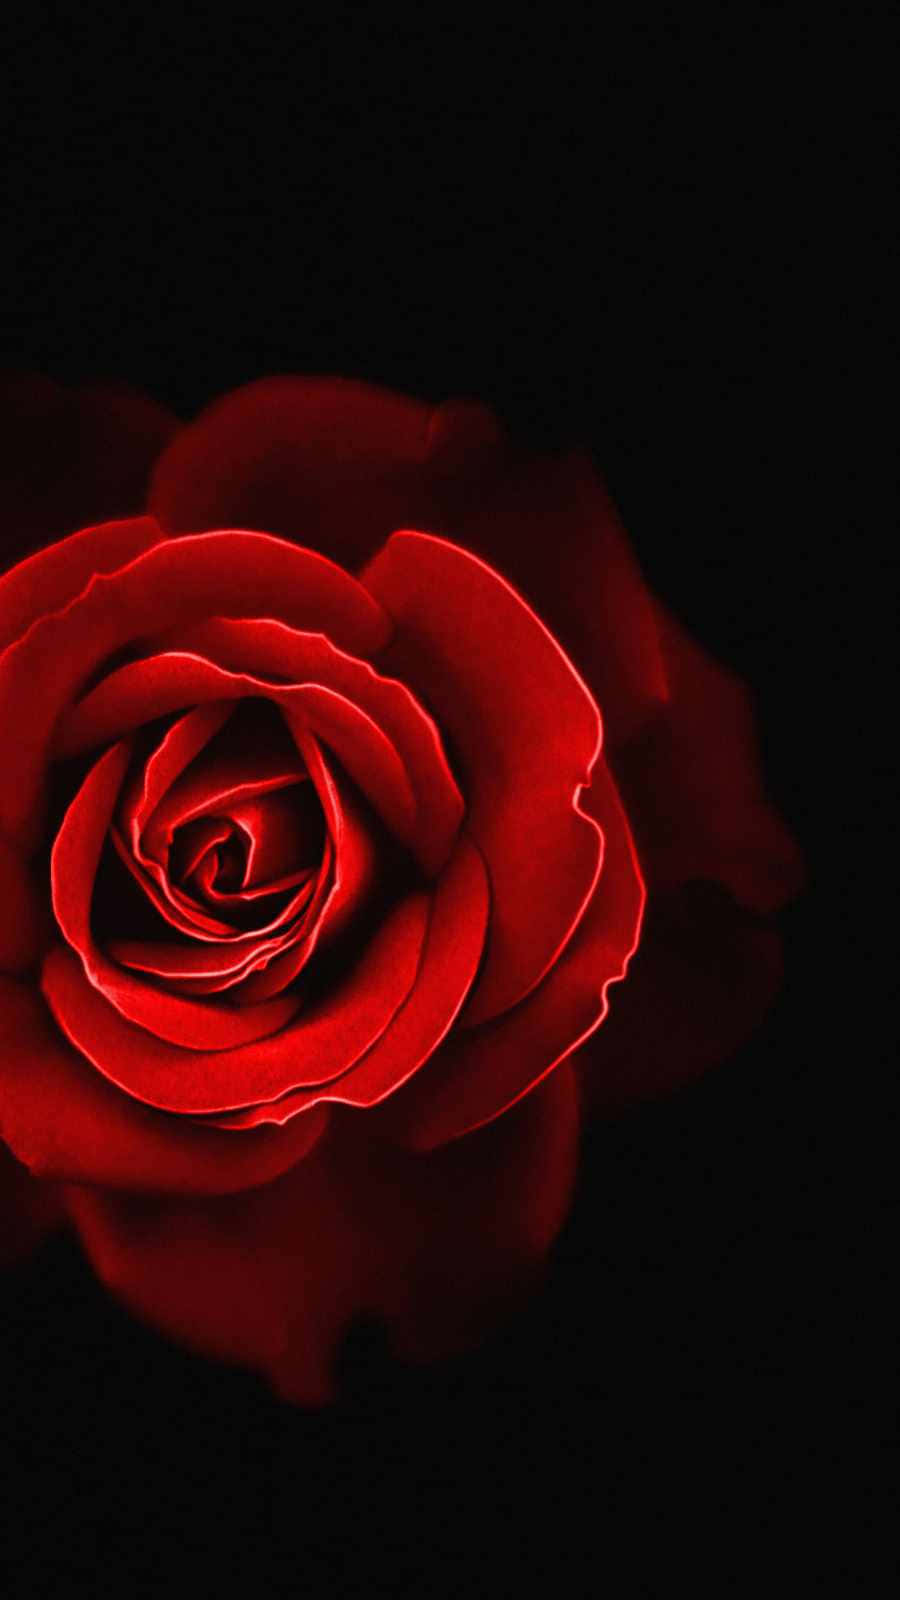 A Red Rose On A Black Background